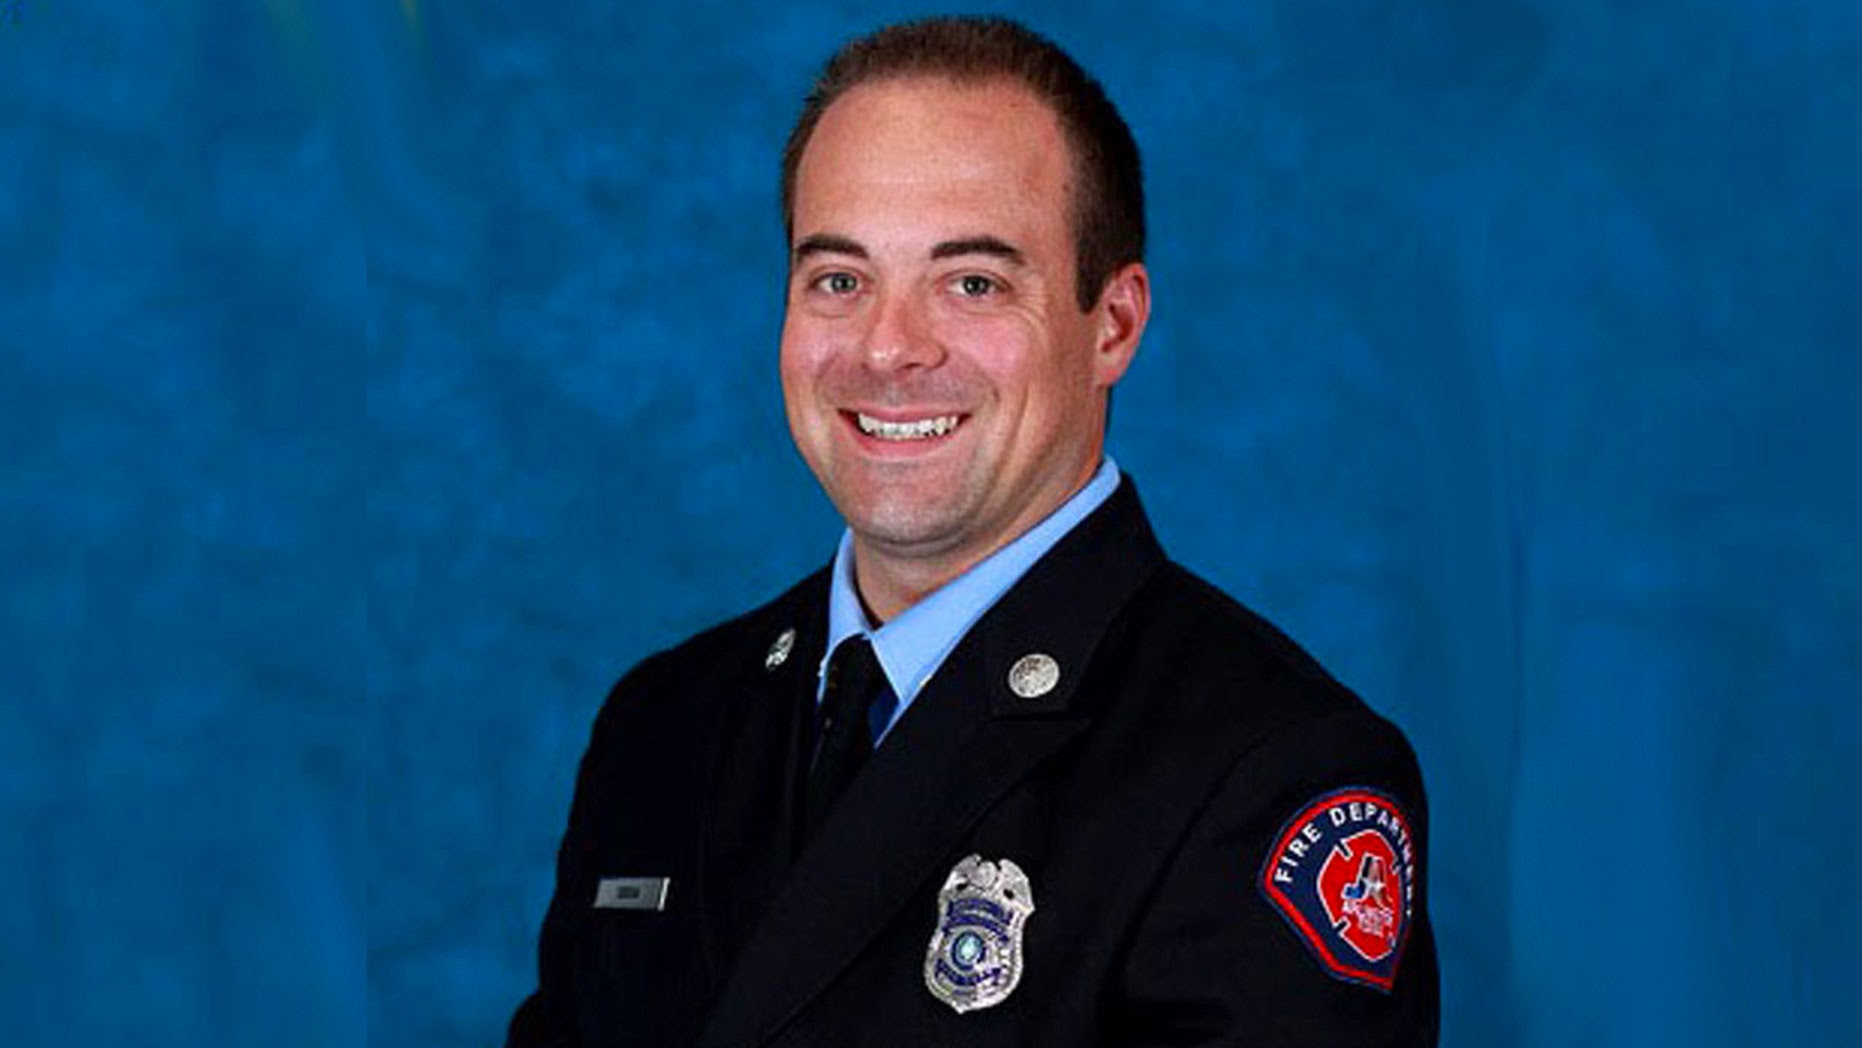 Why is this firefighter's death in Cancun suspicious?